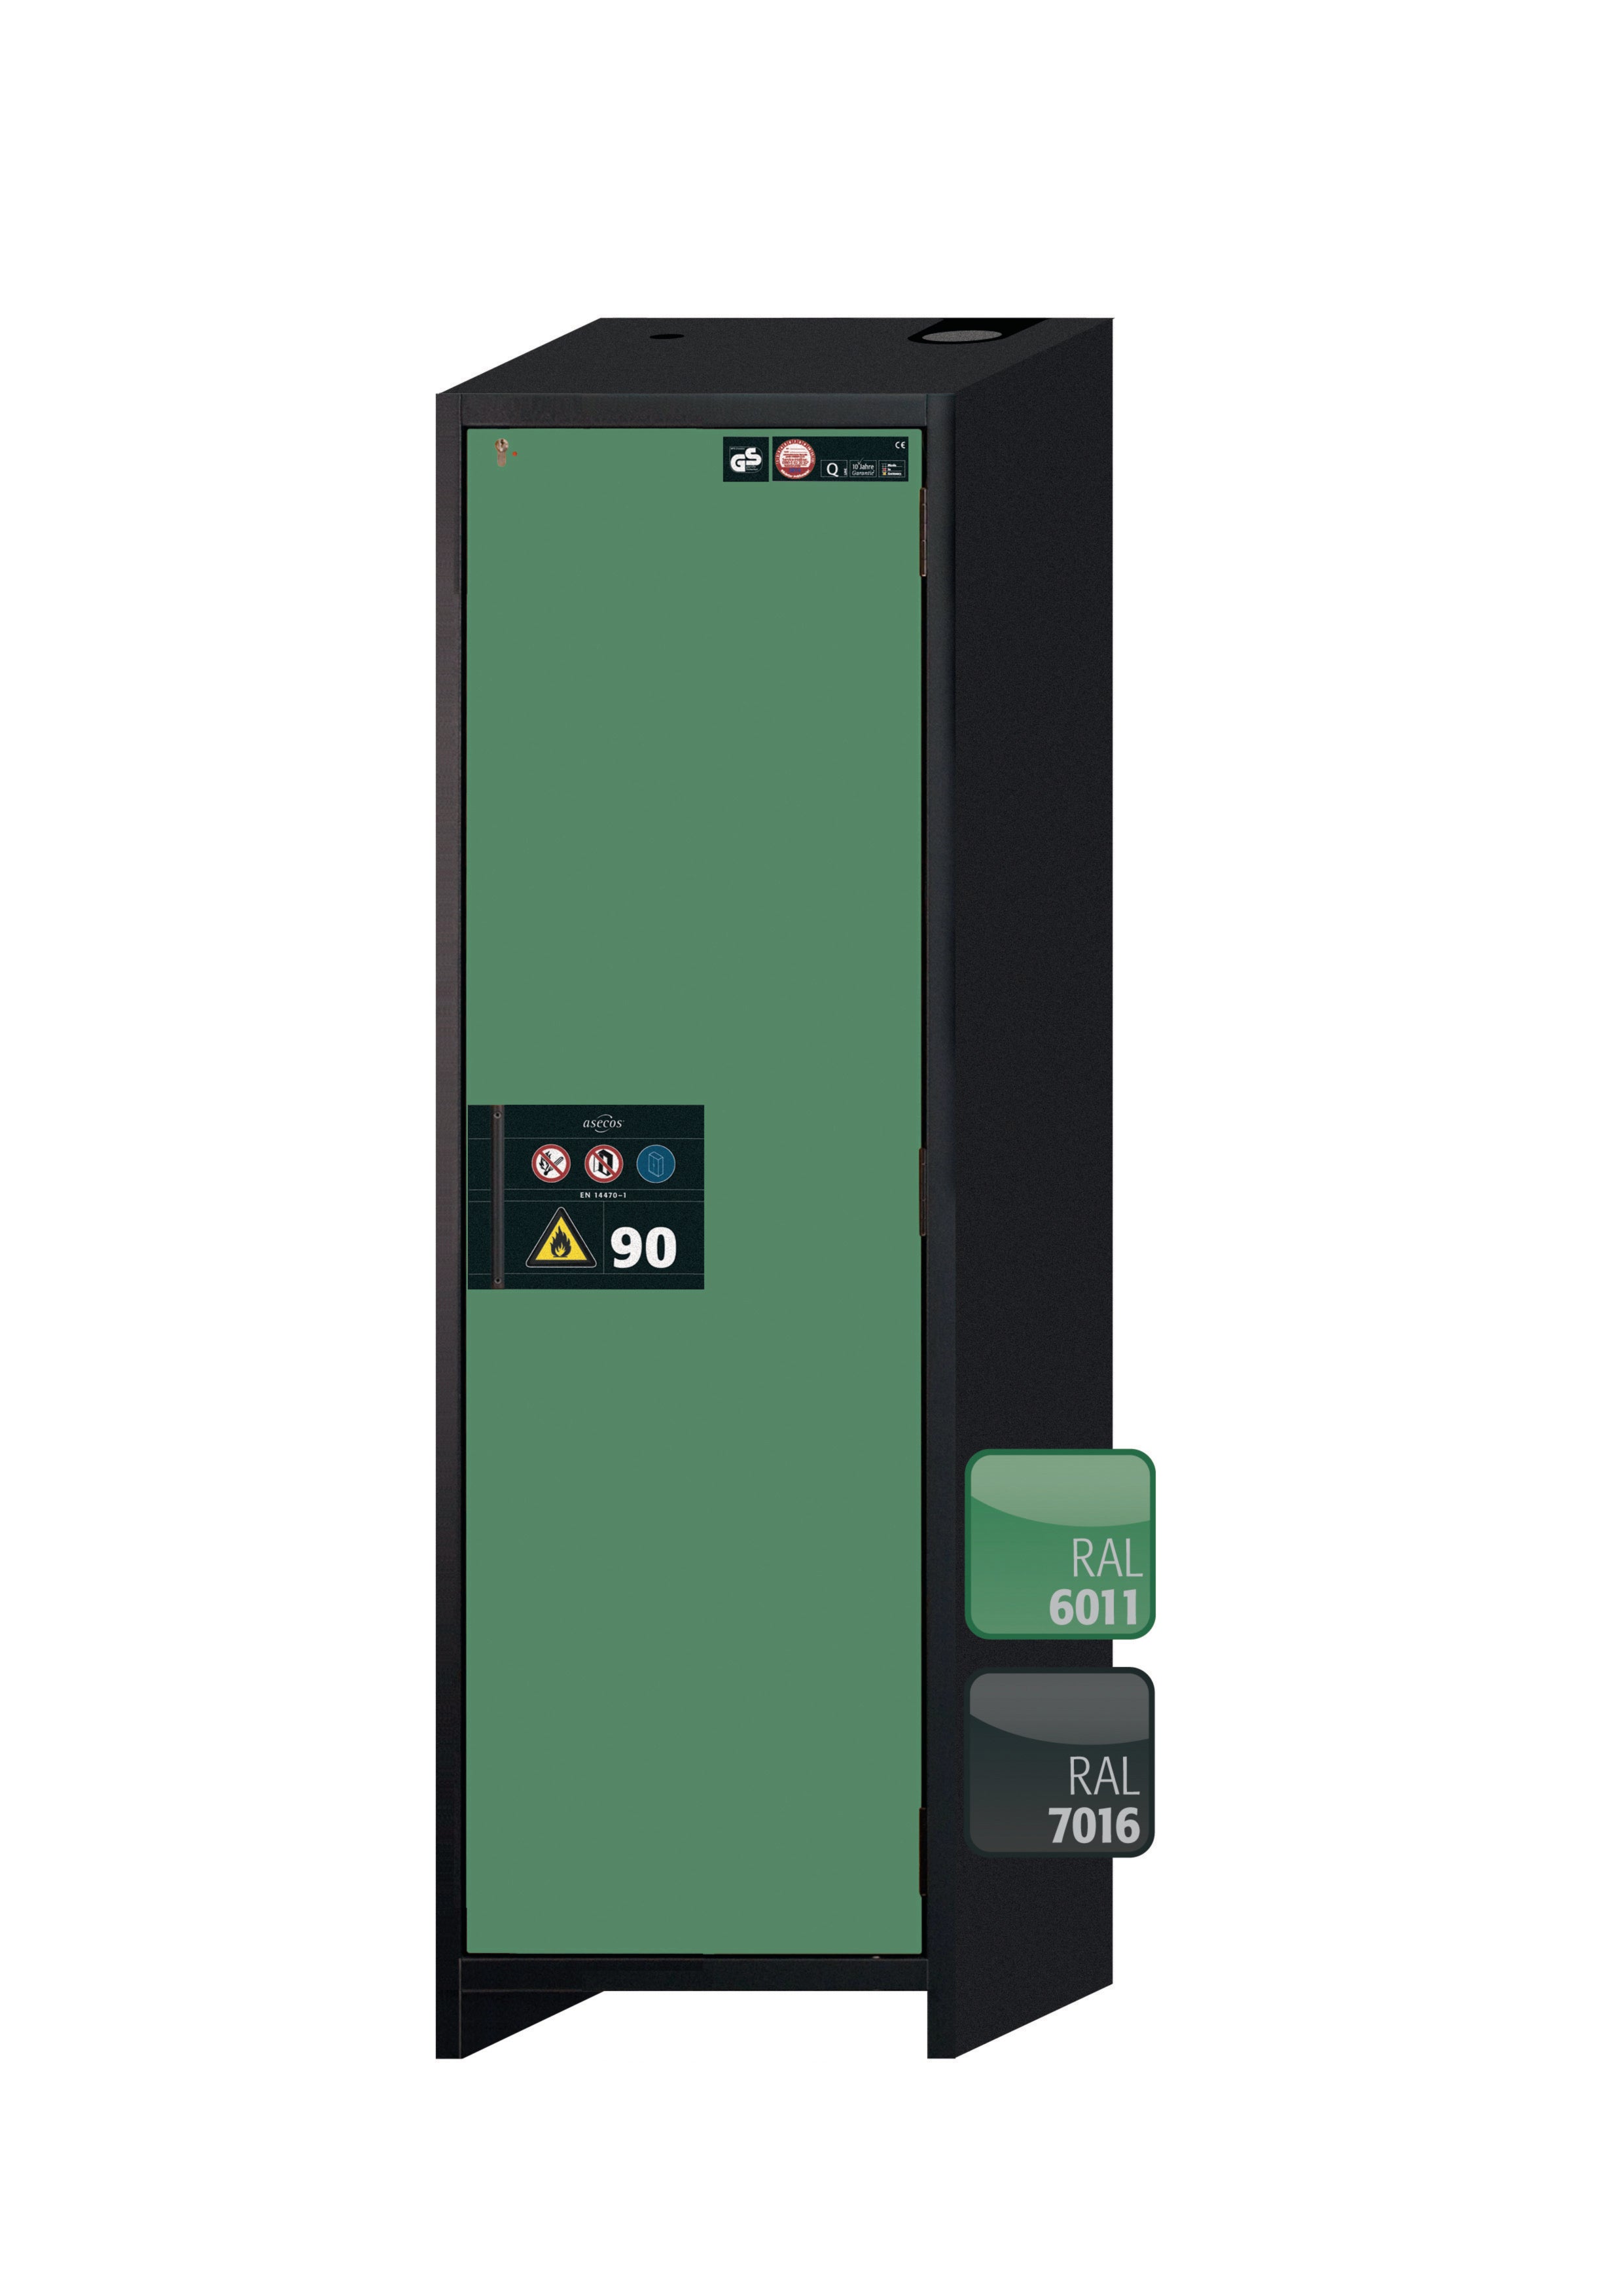 Type 90 safety storage cabinet Q-CLASSIC-90 model Q90.195.060.R in reseda green RAL 6011 with 2x tray shelf (standard) (stainless steel 1.4301),